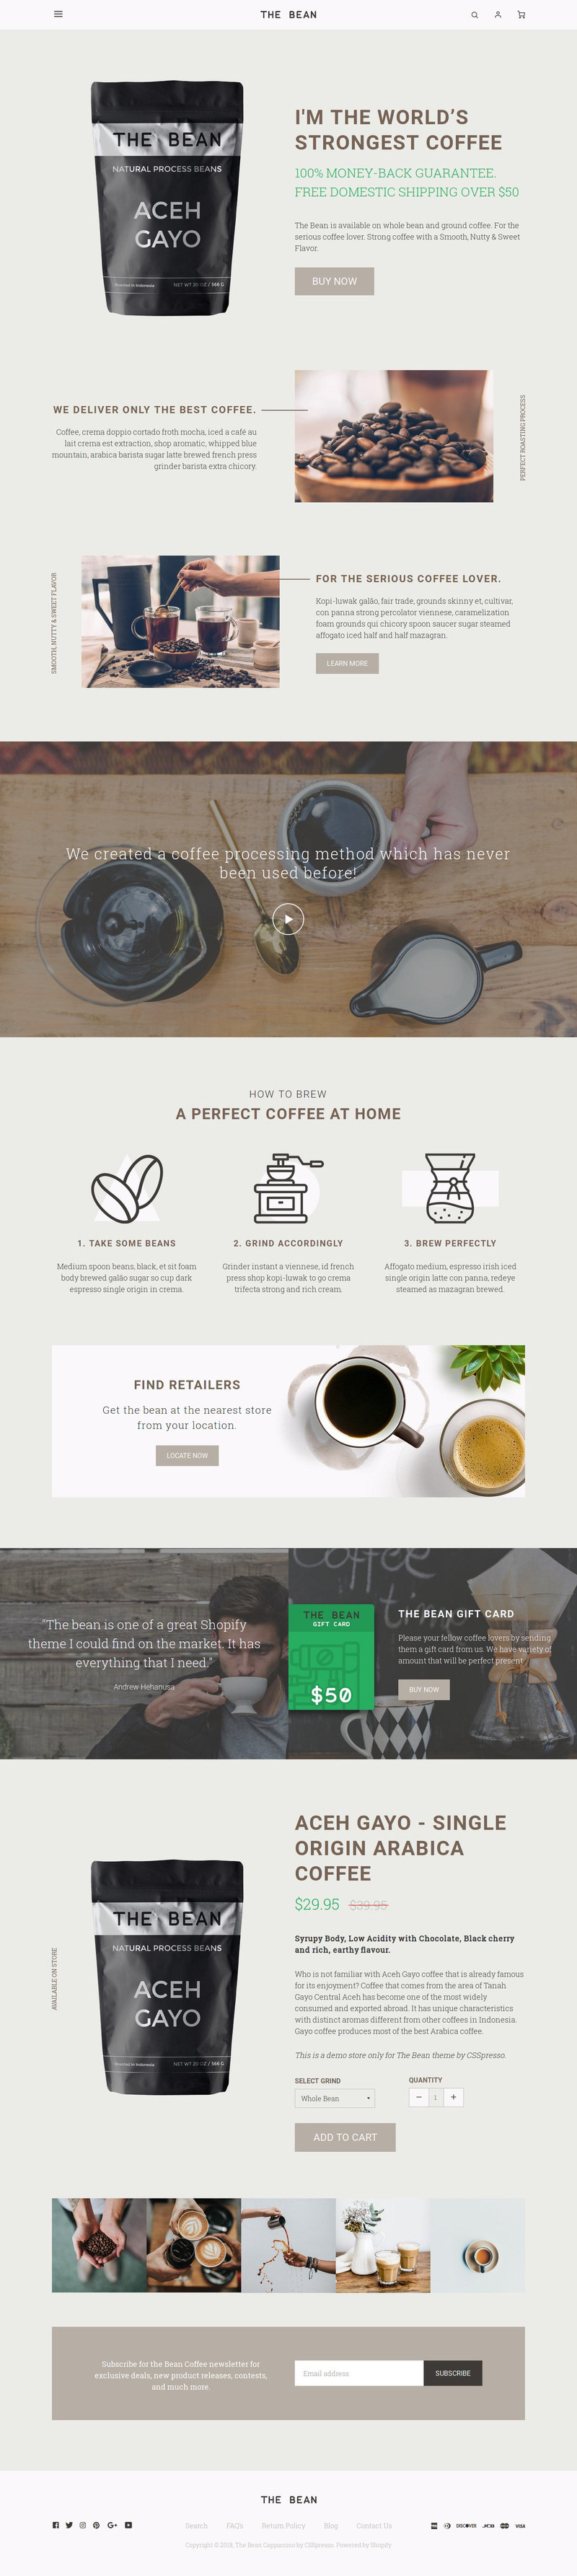 Theme Ecommerce Website design Online shop Shopify Woocommerce Coffee bean store